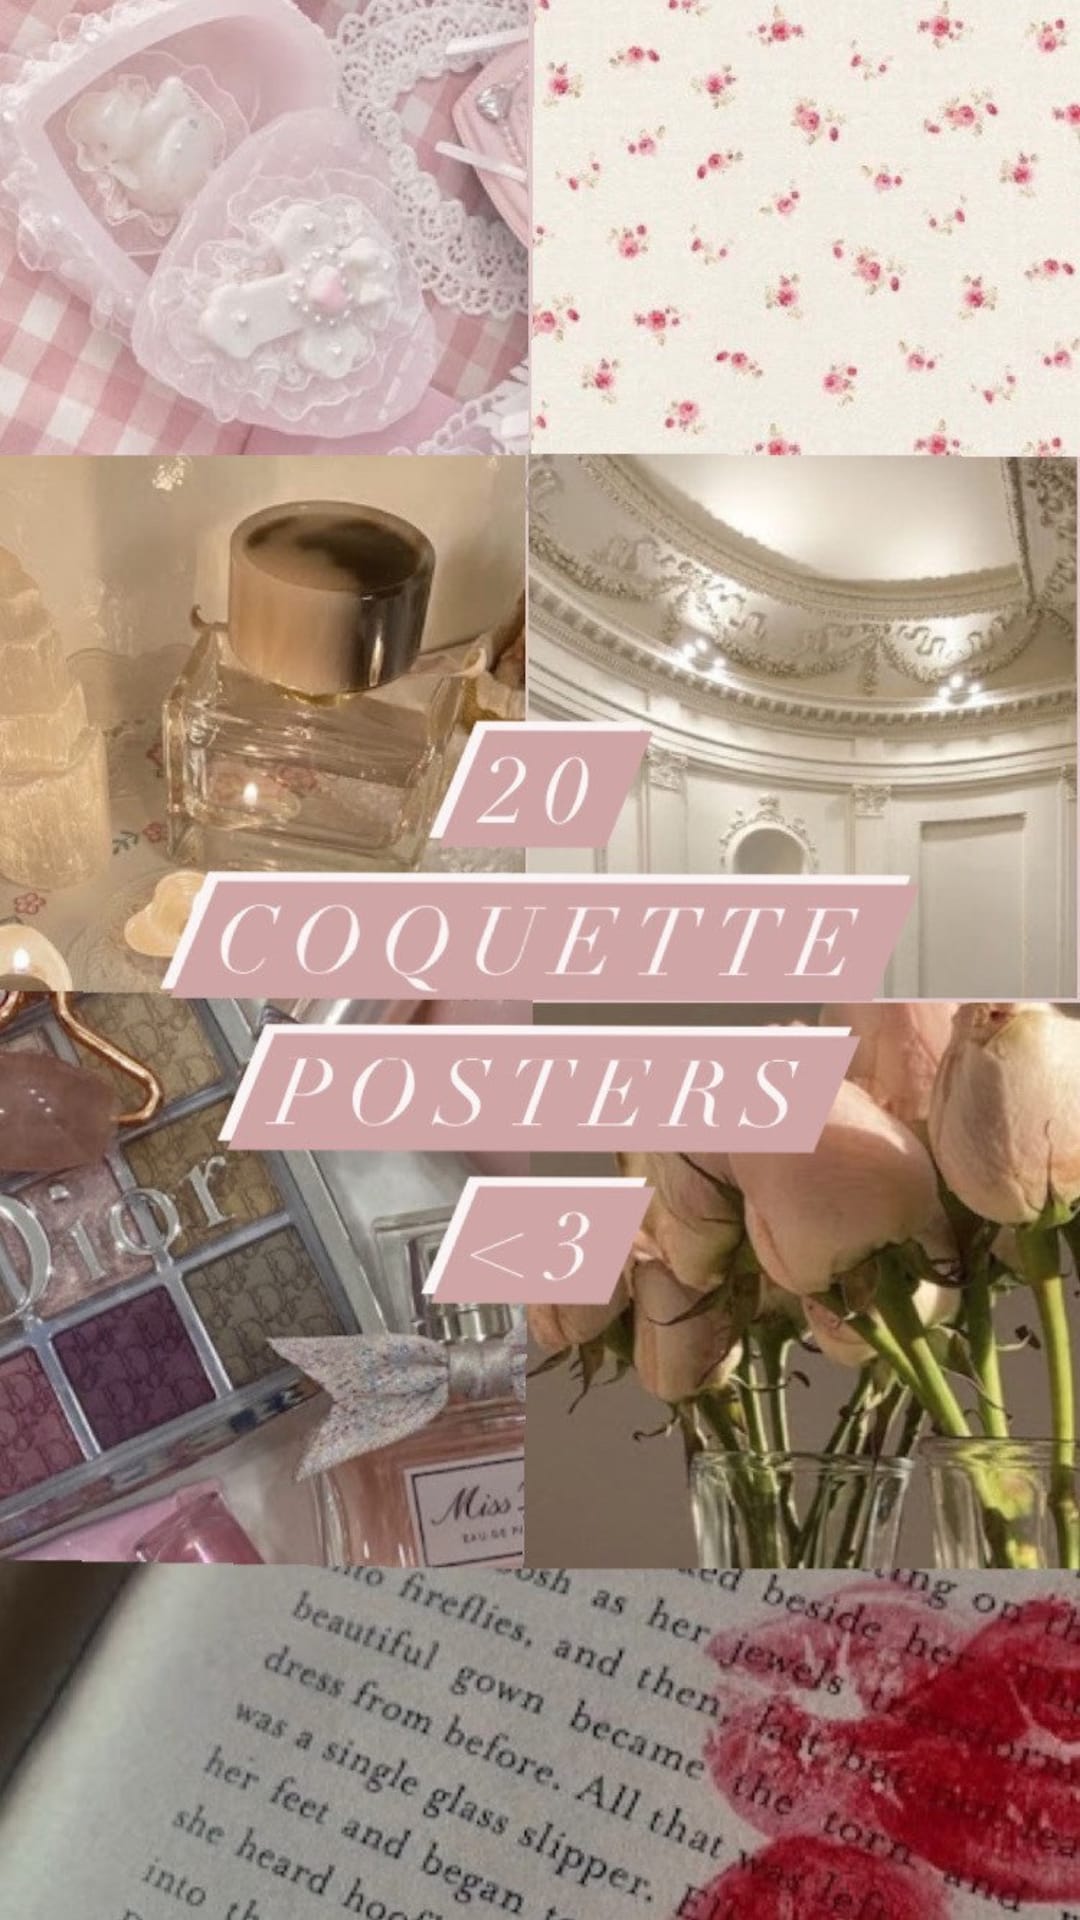 Coquette Aesthetic Poster Set of 15 / Coquette Aesthetic / Pink Aesthetic /  Coquette Wall Decor / Coquette Decor / Pink Wall Decor / 